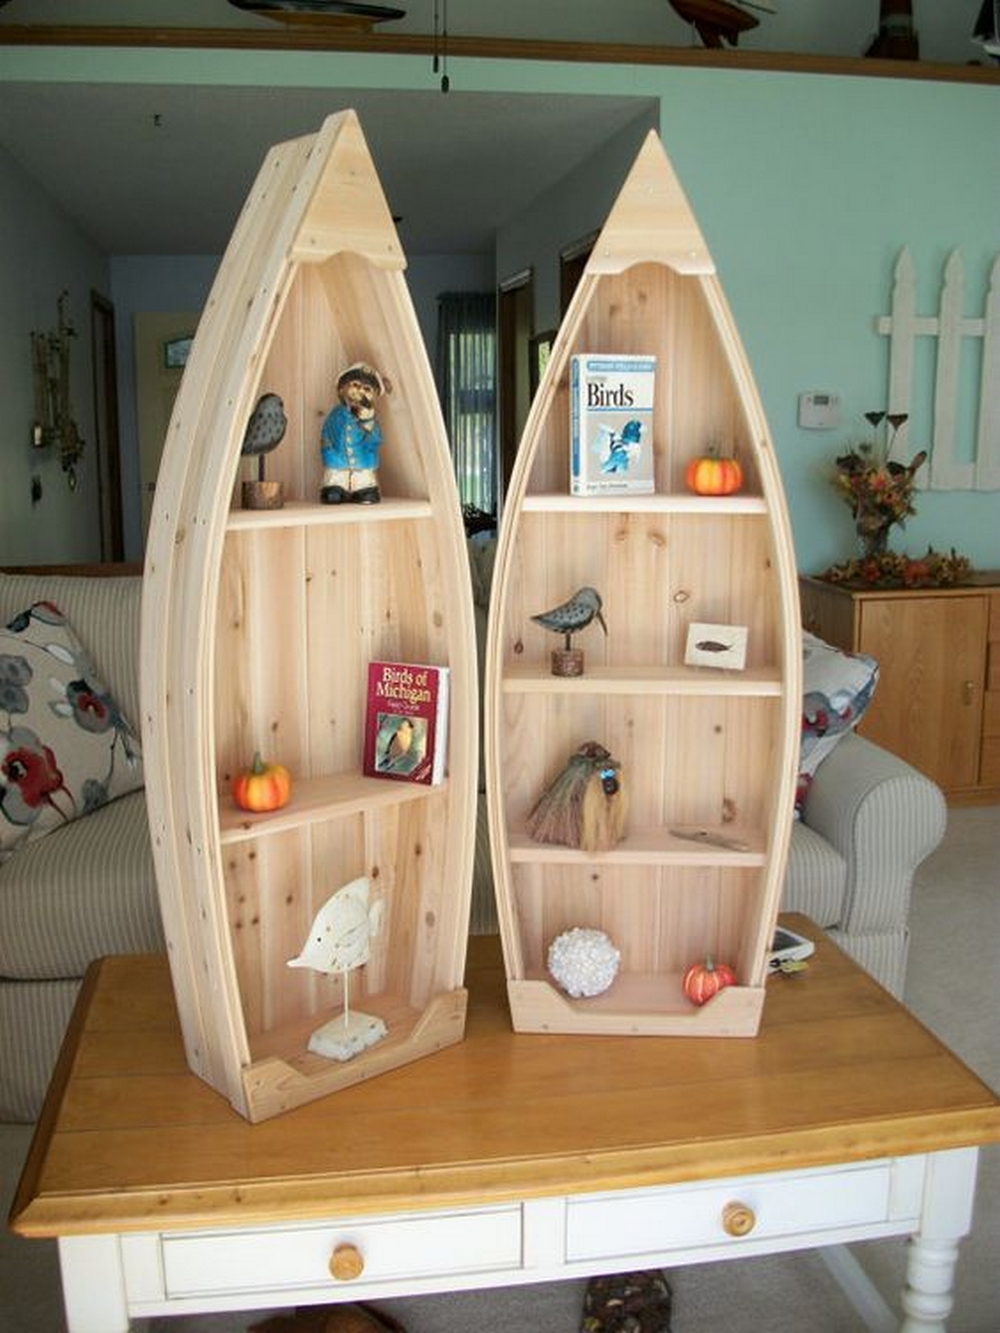 how to build a boat bookshelf your projects@obn